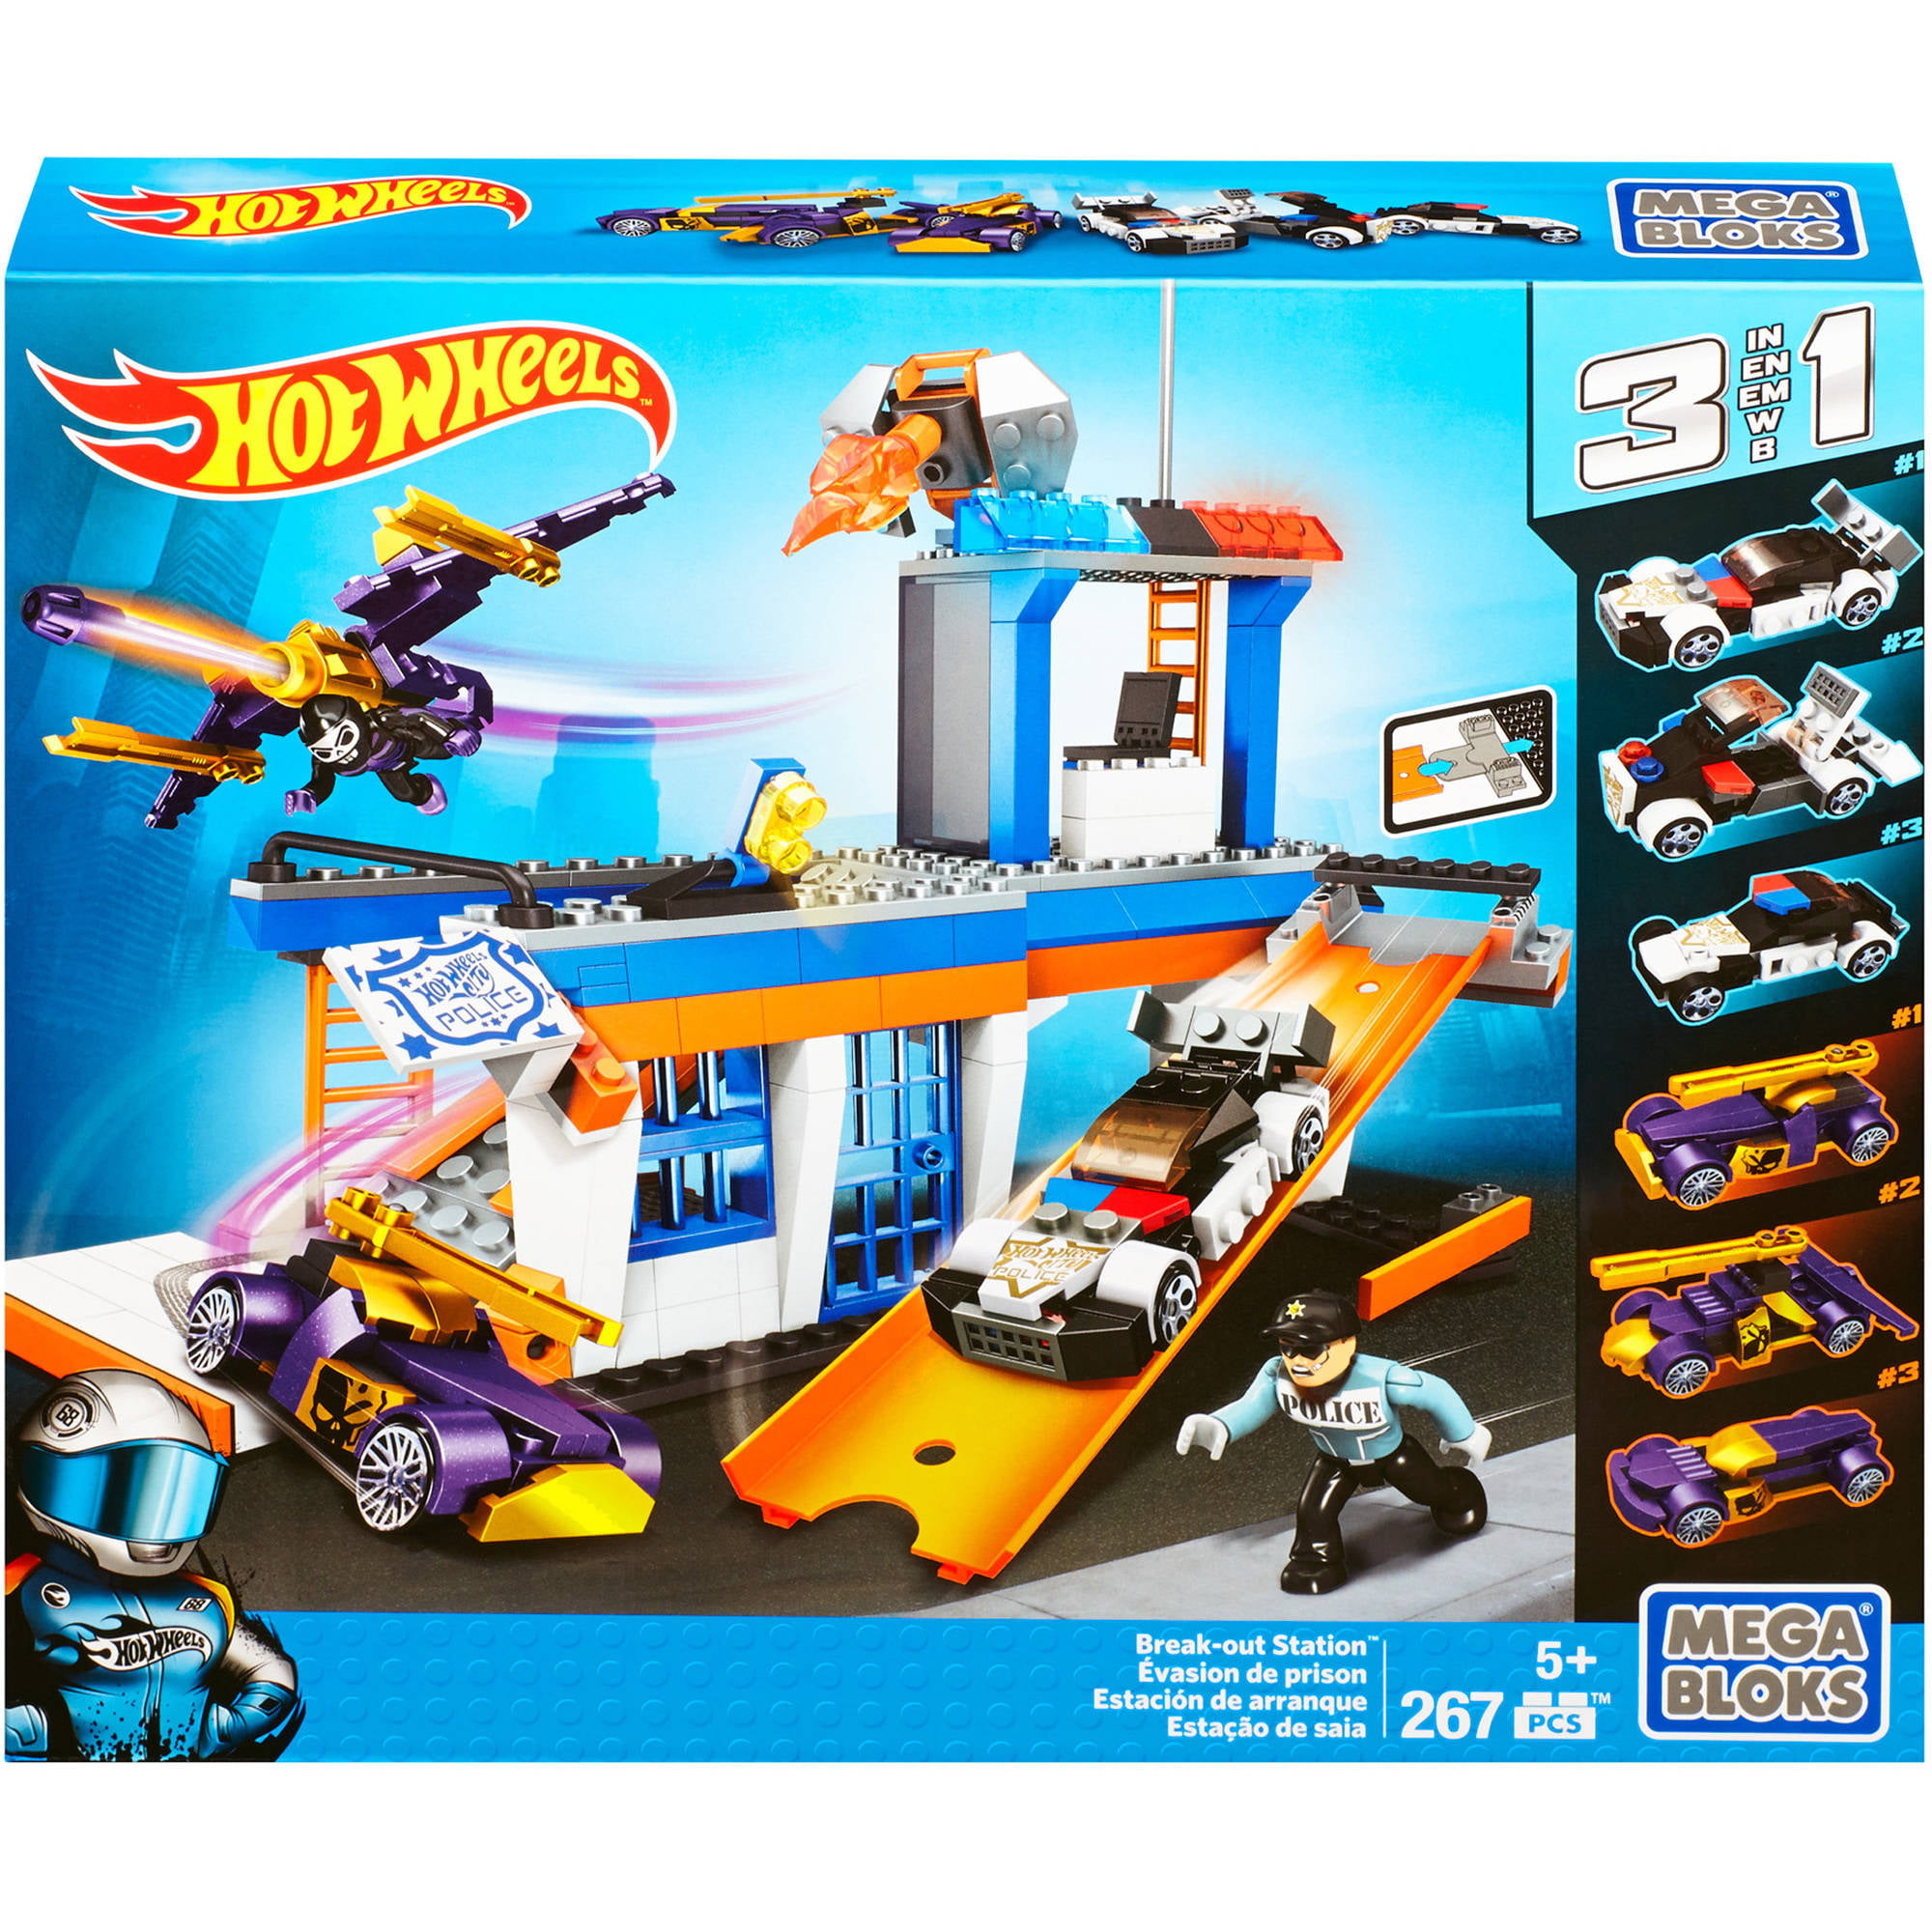 Hot Wheels Mega Bloks 3 in 1 Break-out Station NIB  Ships Free in U.S. Details about   REDUCED 